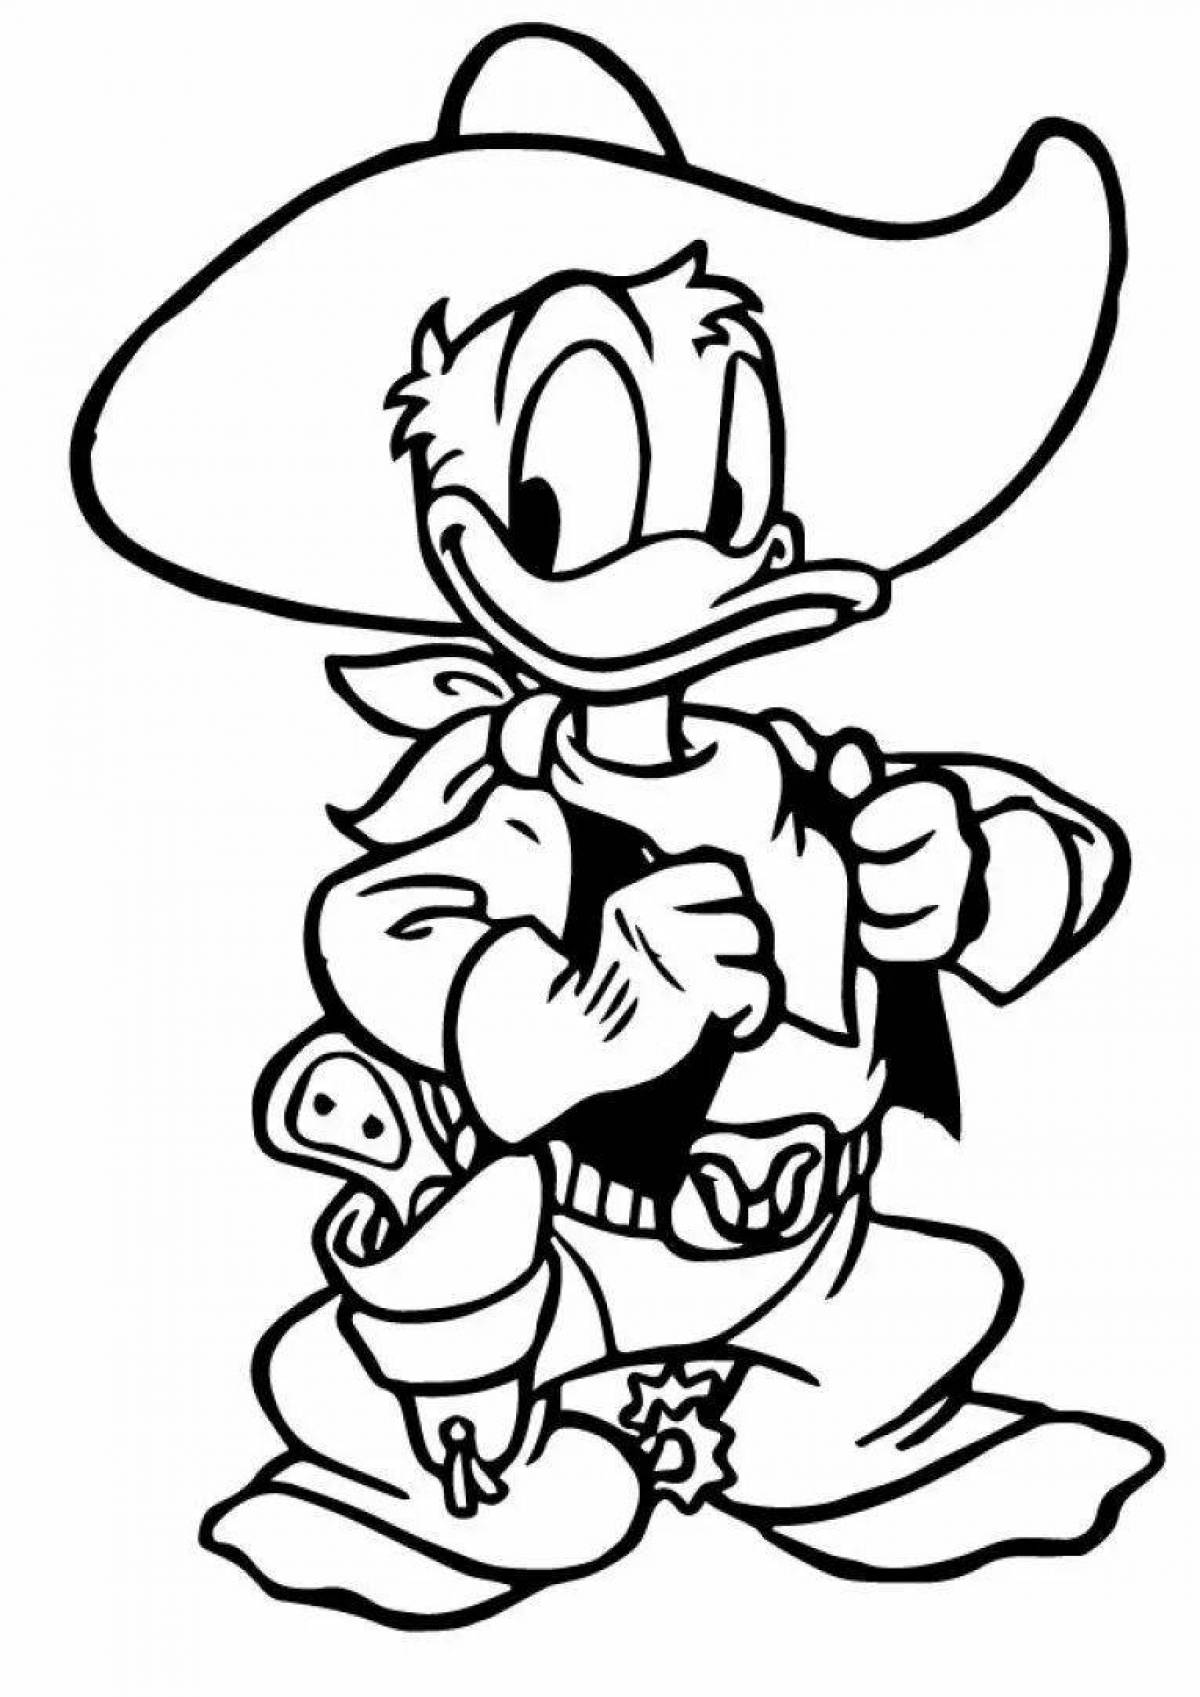 Jazzy twist mcduck coloring page